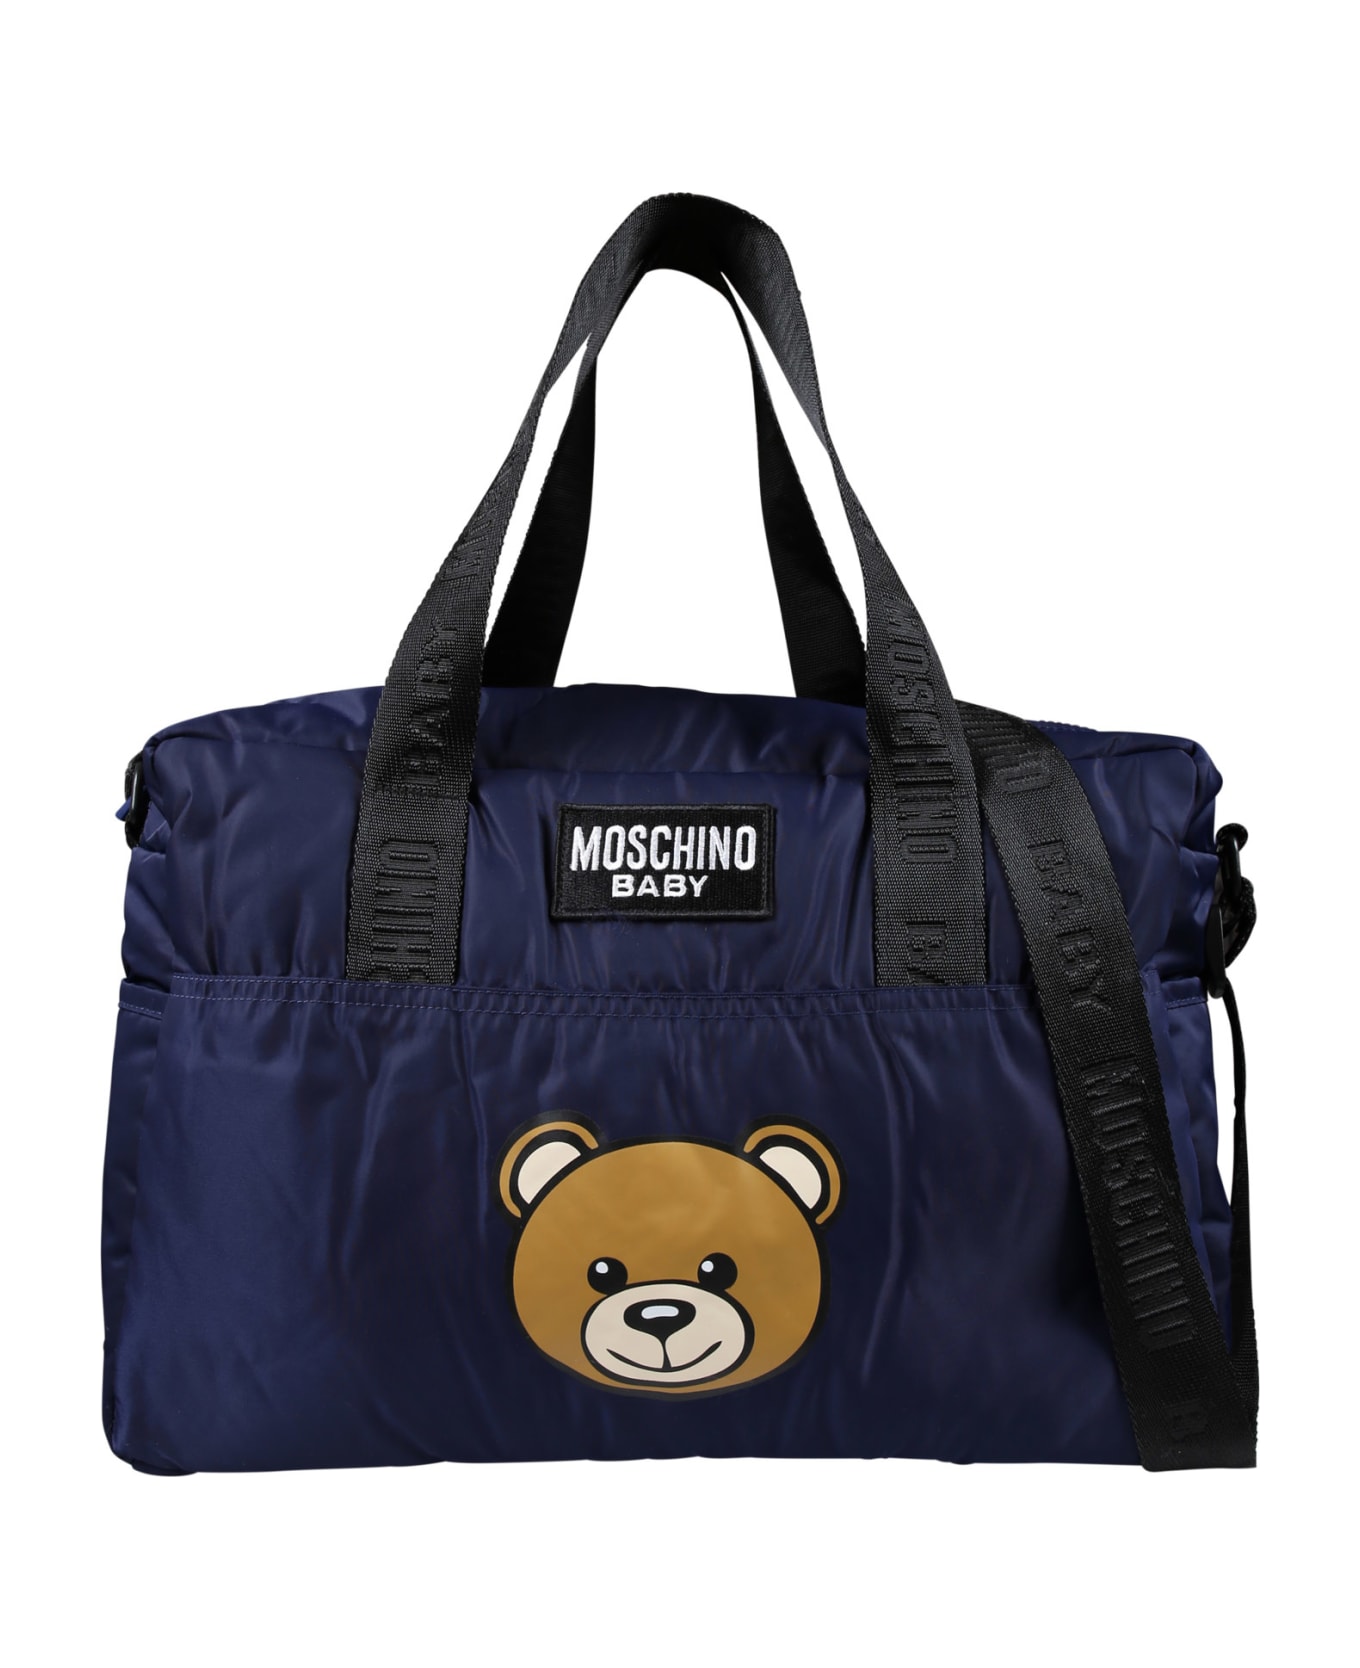 Moschino Blue Mom Bag For Babies With Teddy Bear And Logo - Blue